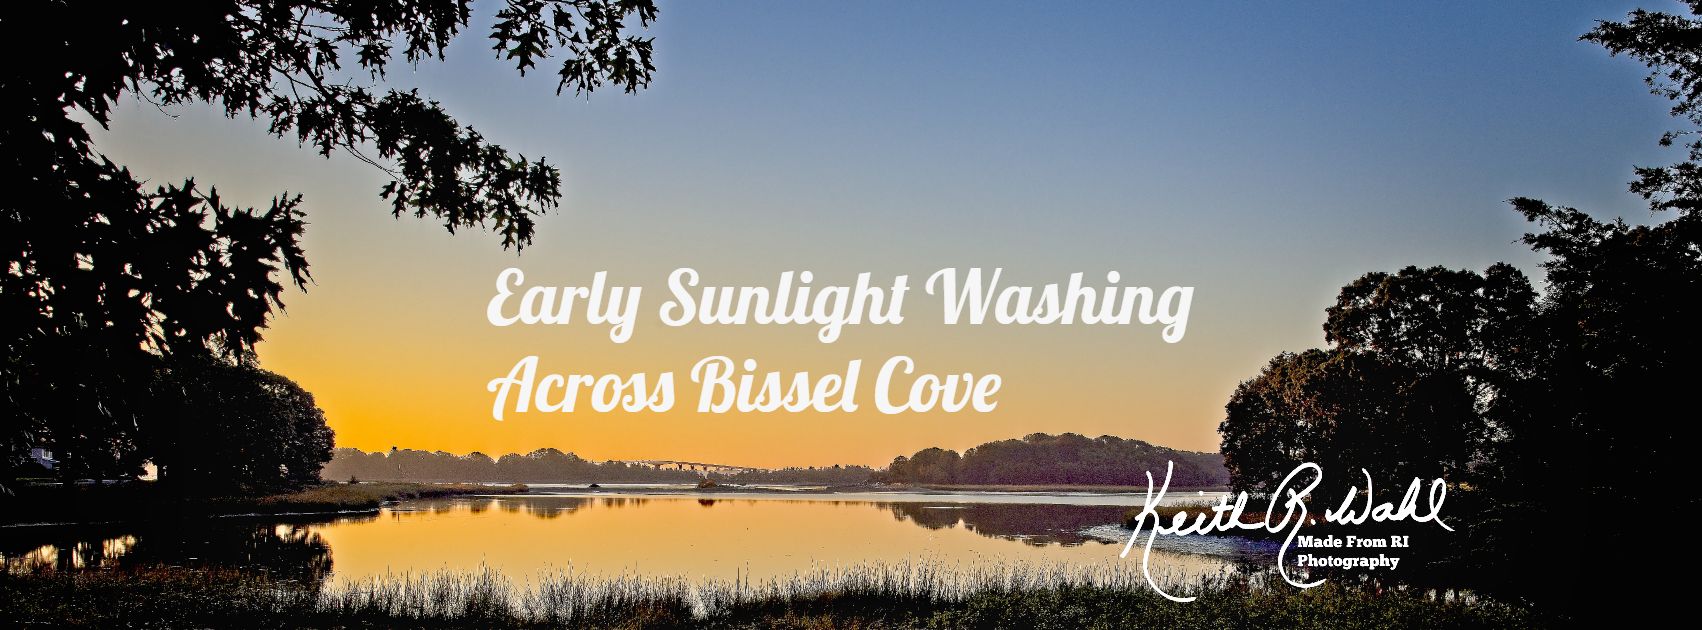 Early Sunlight Washing Across Bissel Cove